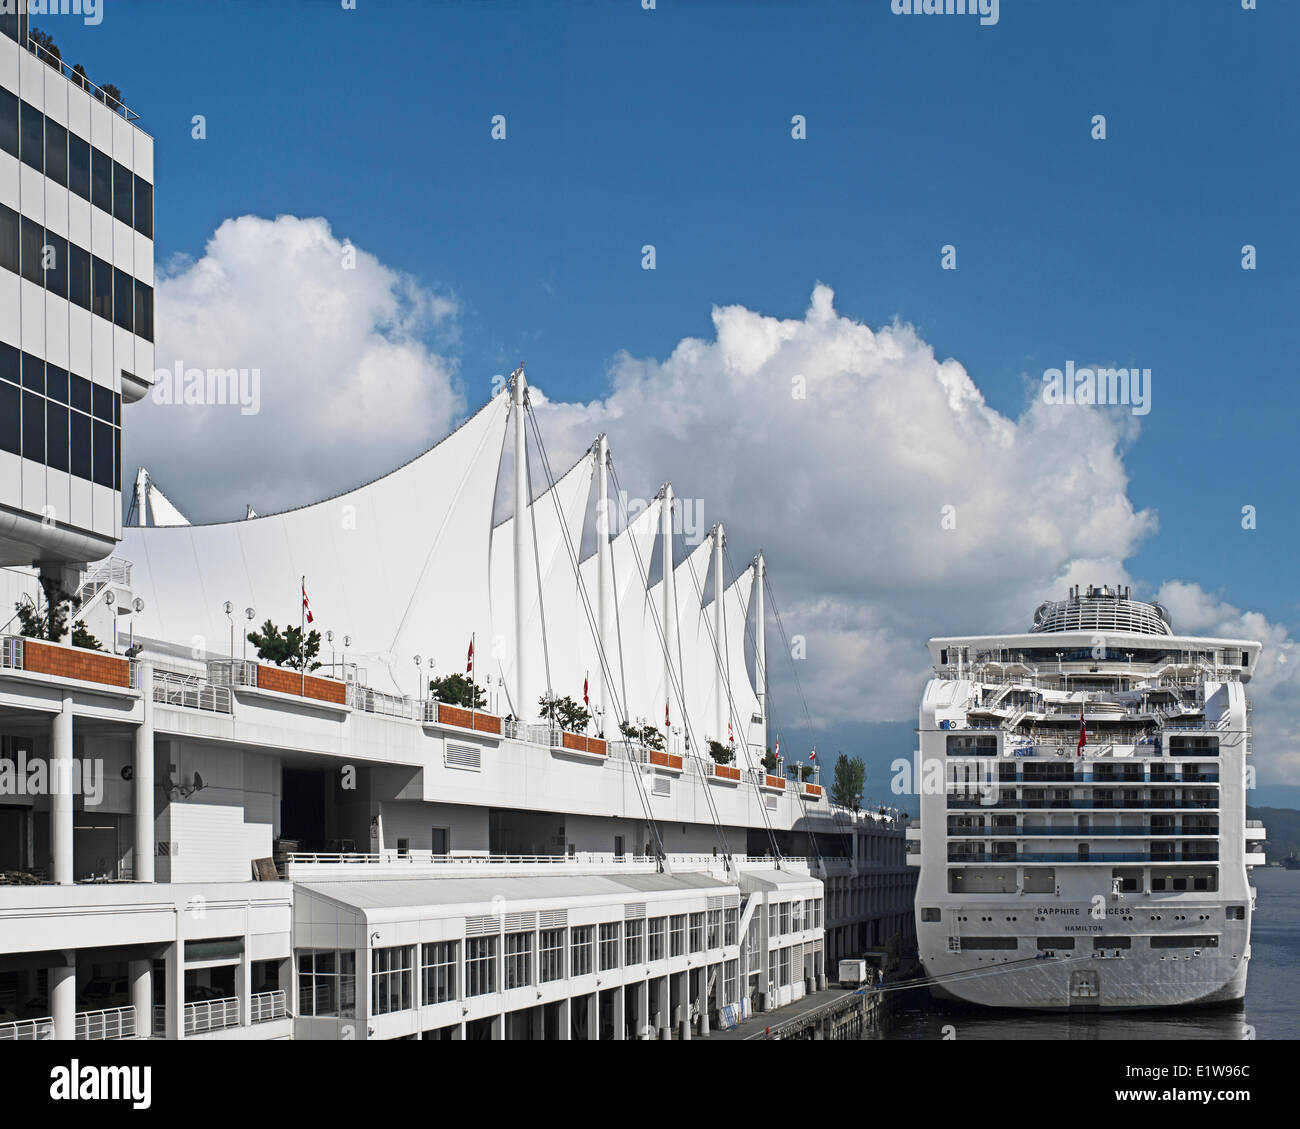 Cruise ship at Canada Place, Vancouver, British Columbia, Canada Stock Photo